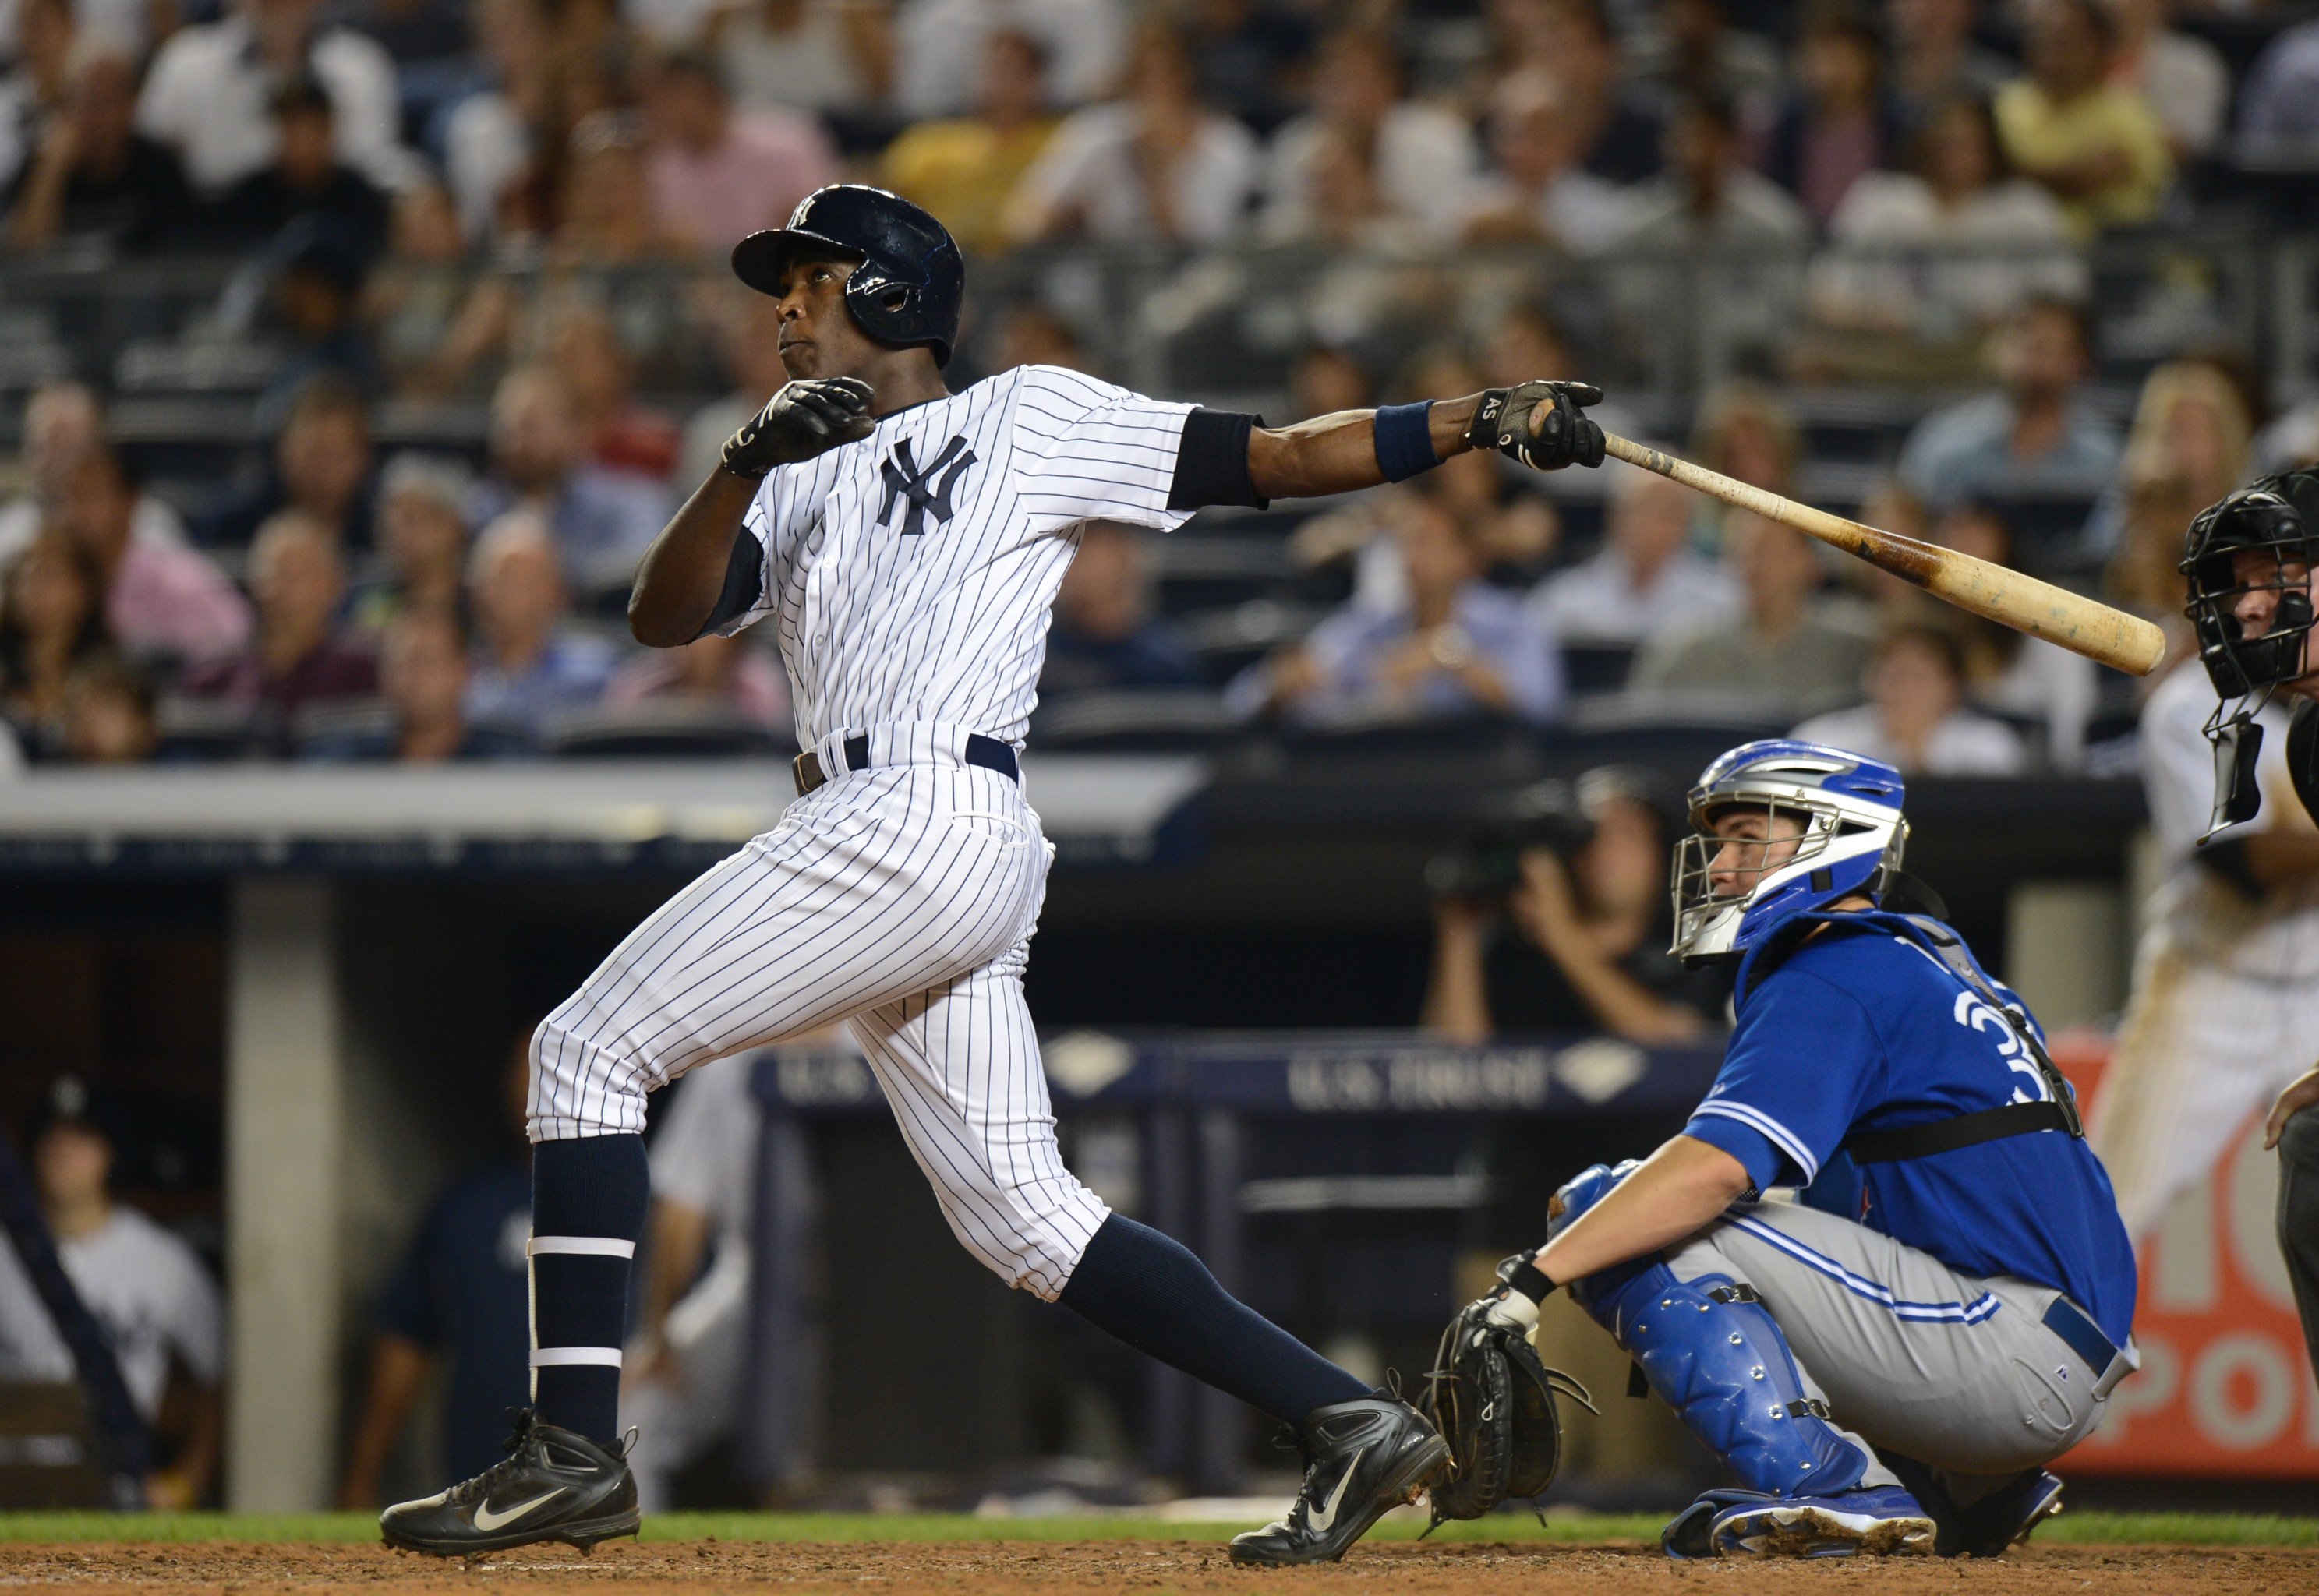 Yankees Great Alfonso Soriano Made Nearly $170 Million and Deserved More  Hall of Fame Love